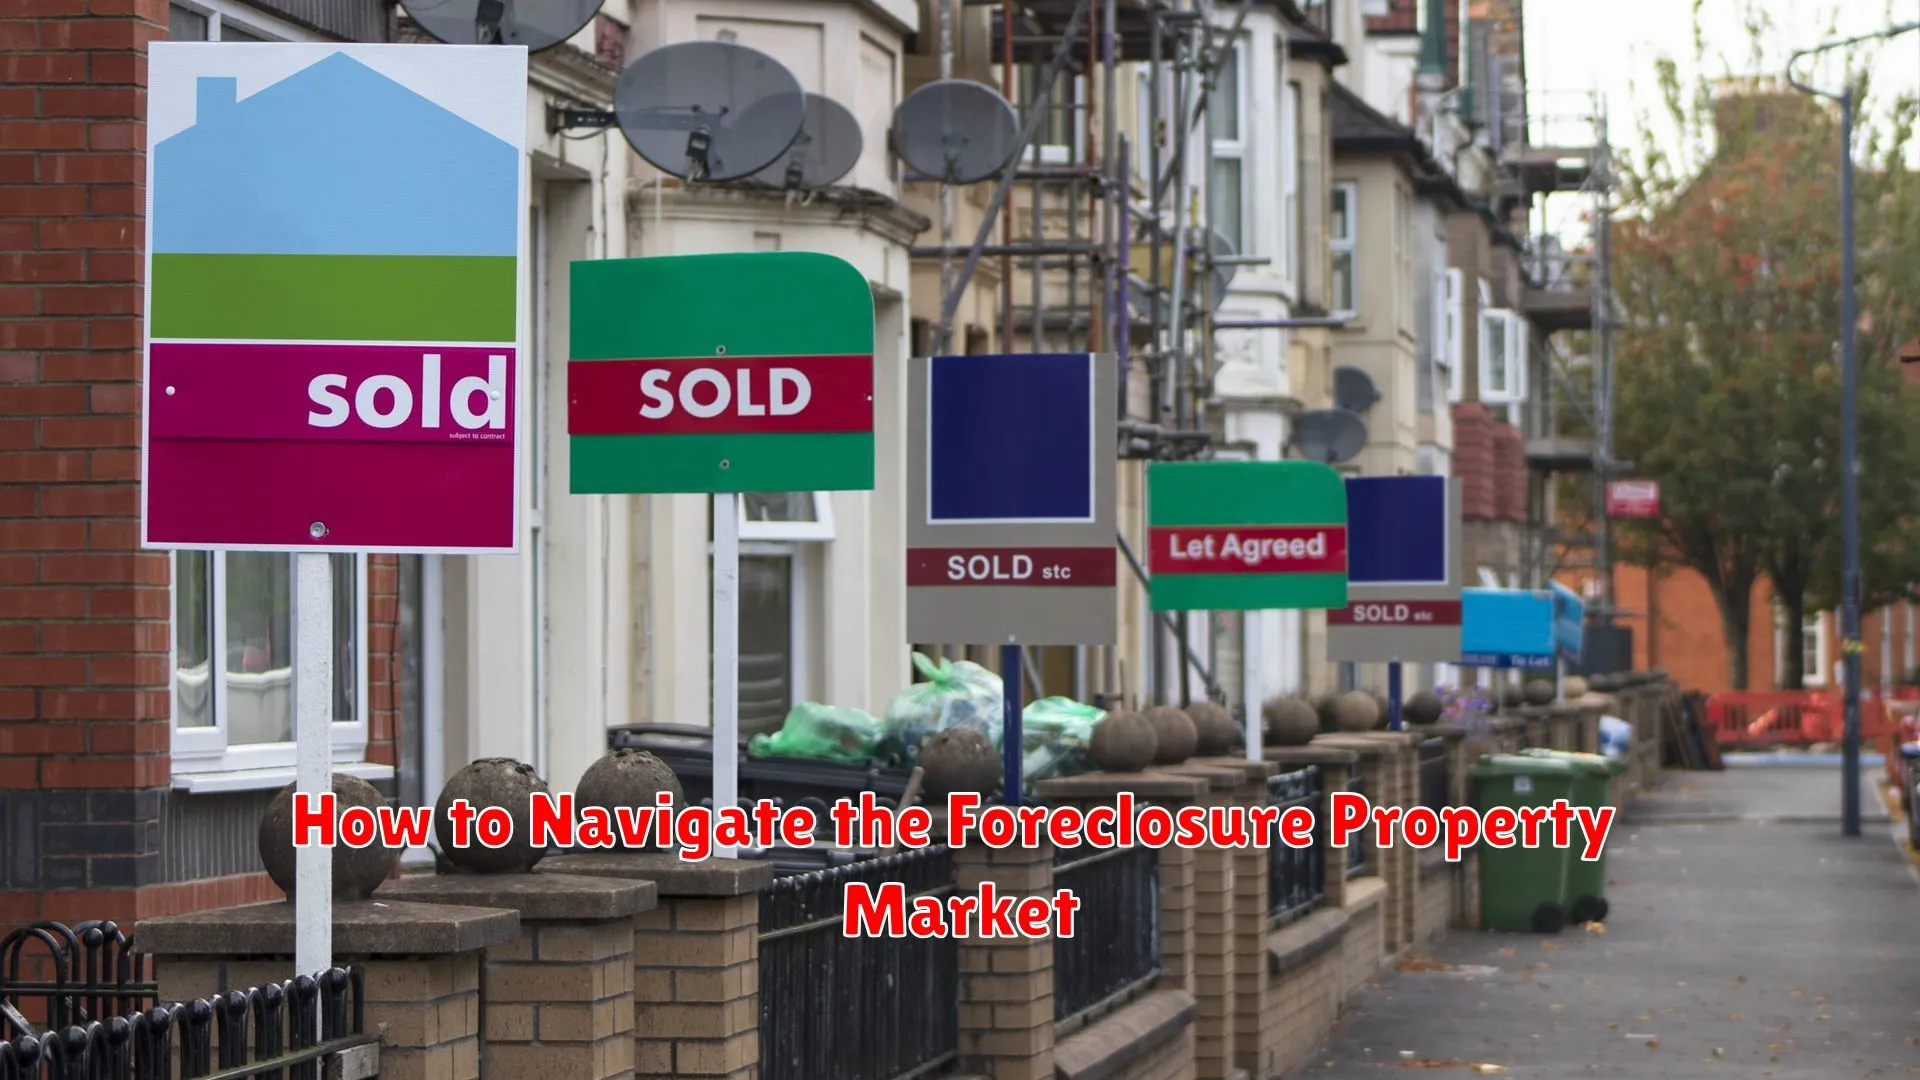 How to Navigate the Foreclosure Property Market